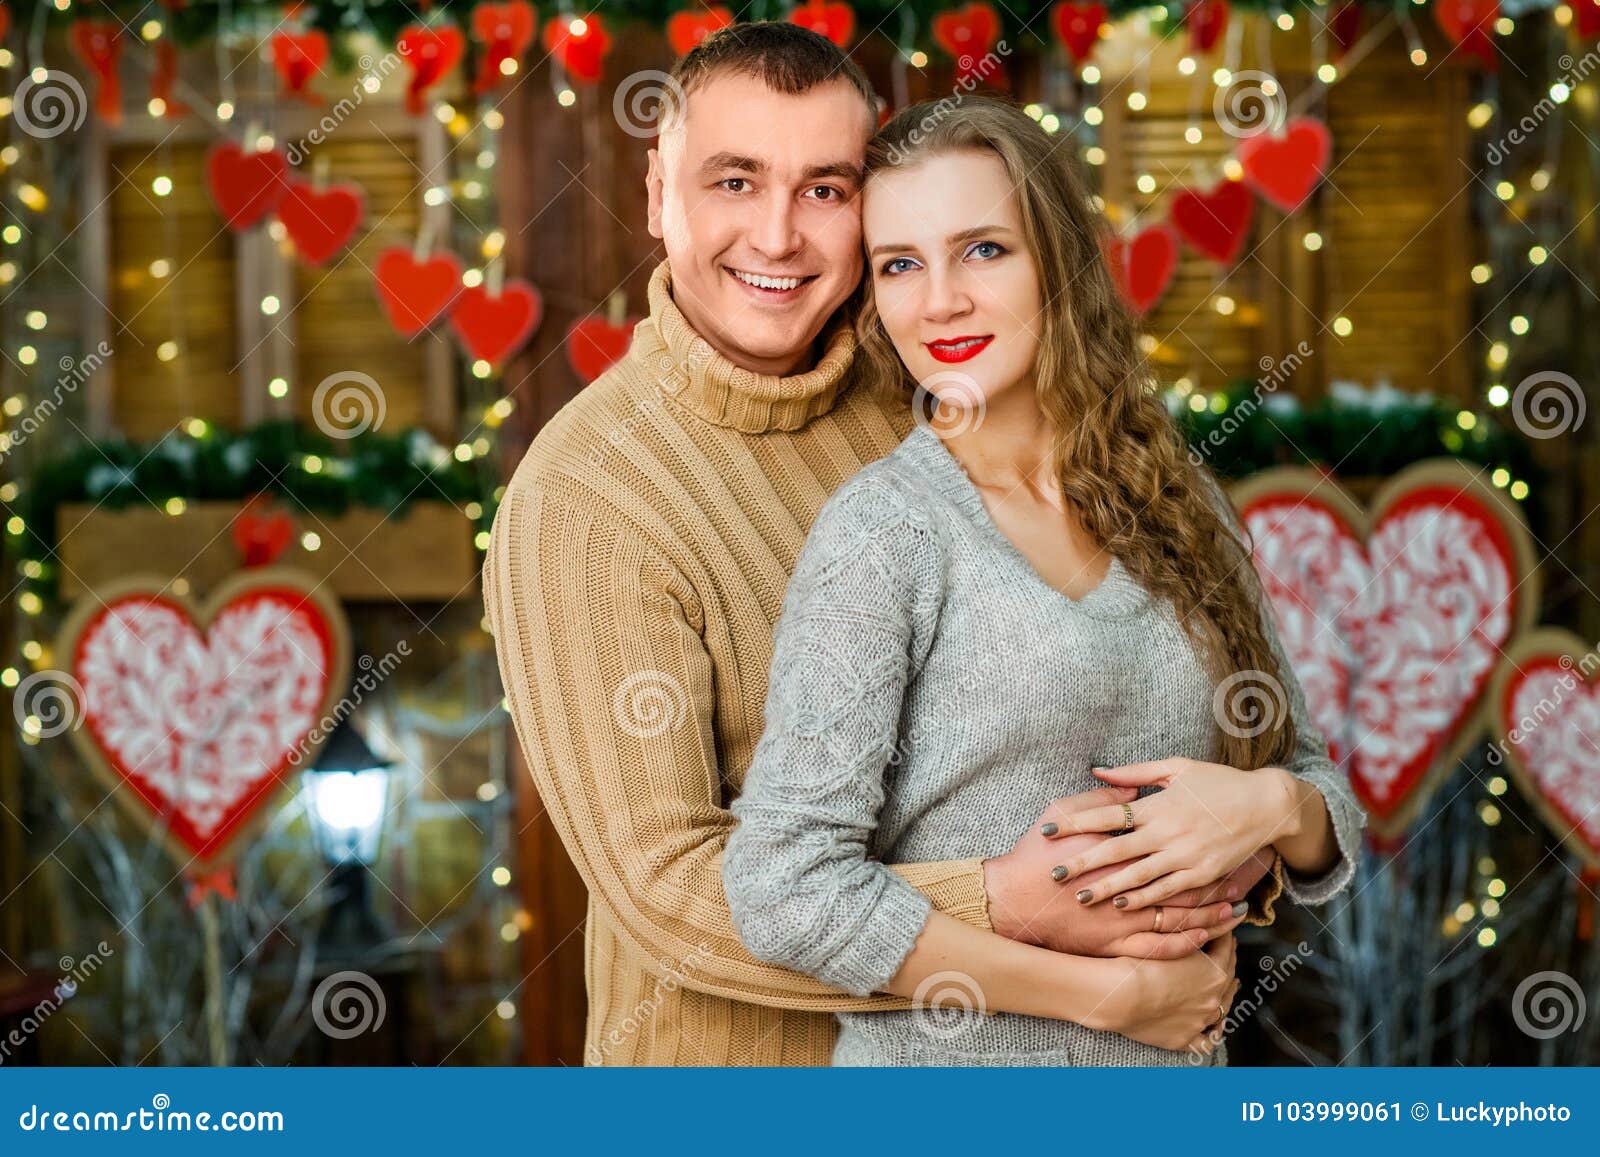 Download Husband And Wife Celebrate Valentine s Day Stock Image Image of people